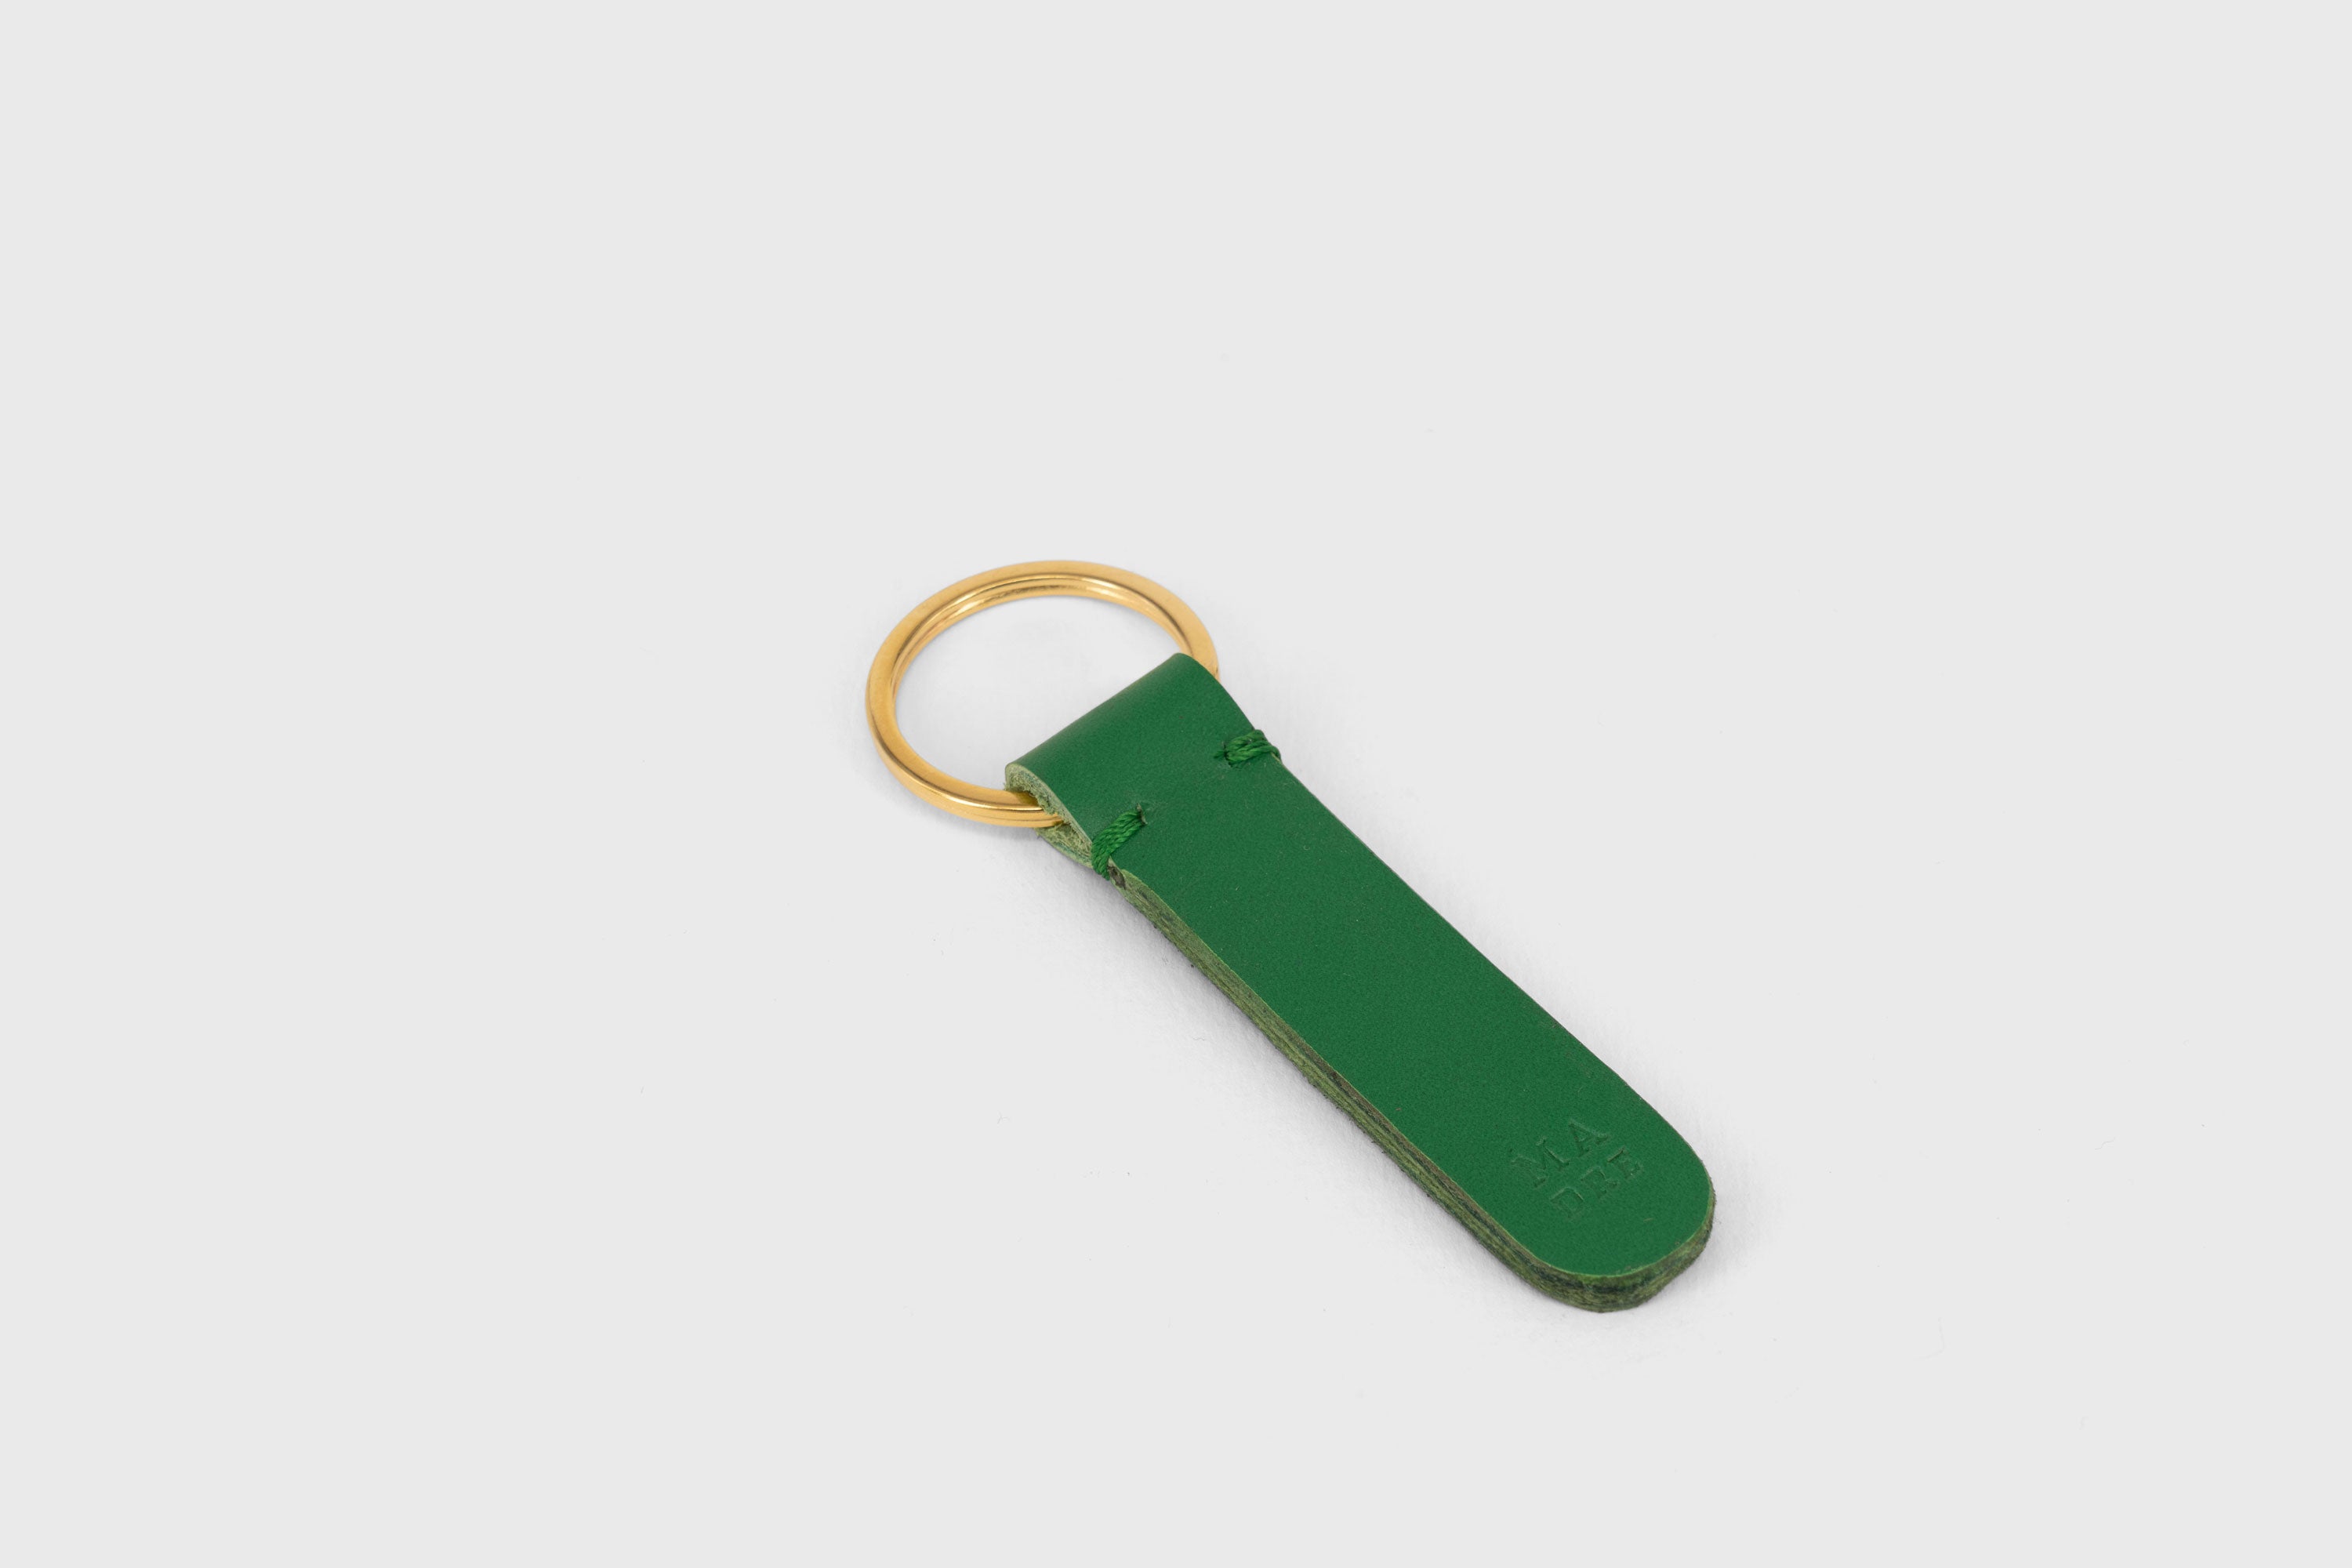 Key Ring Leather Grass Green Color Fob Minimalist Designer Vegetable Tanned Full Grain Handcrafted Personalised Premium Quality Gold Atelier Madre Manuel Dreesmann Barcelona Spain